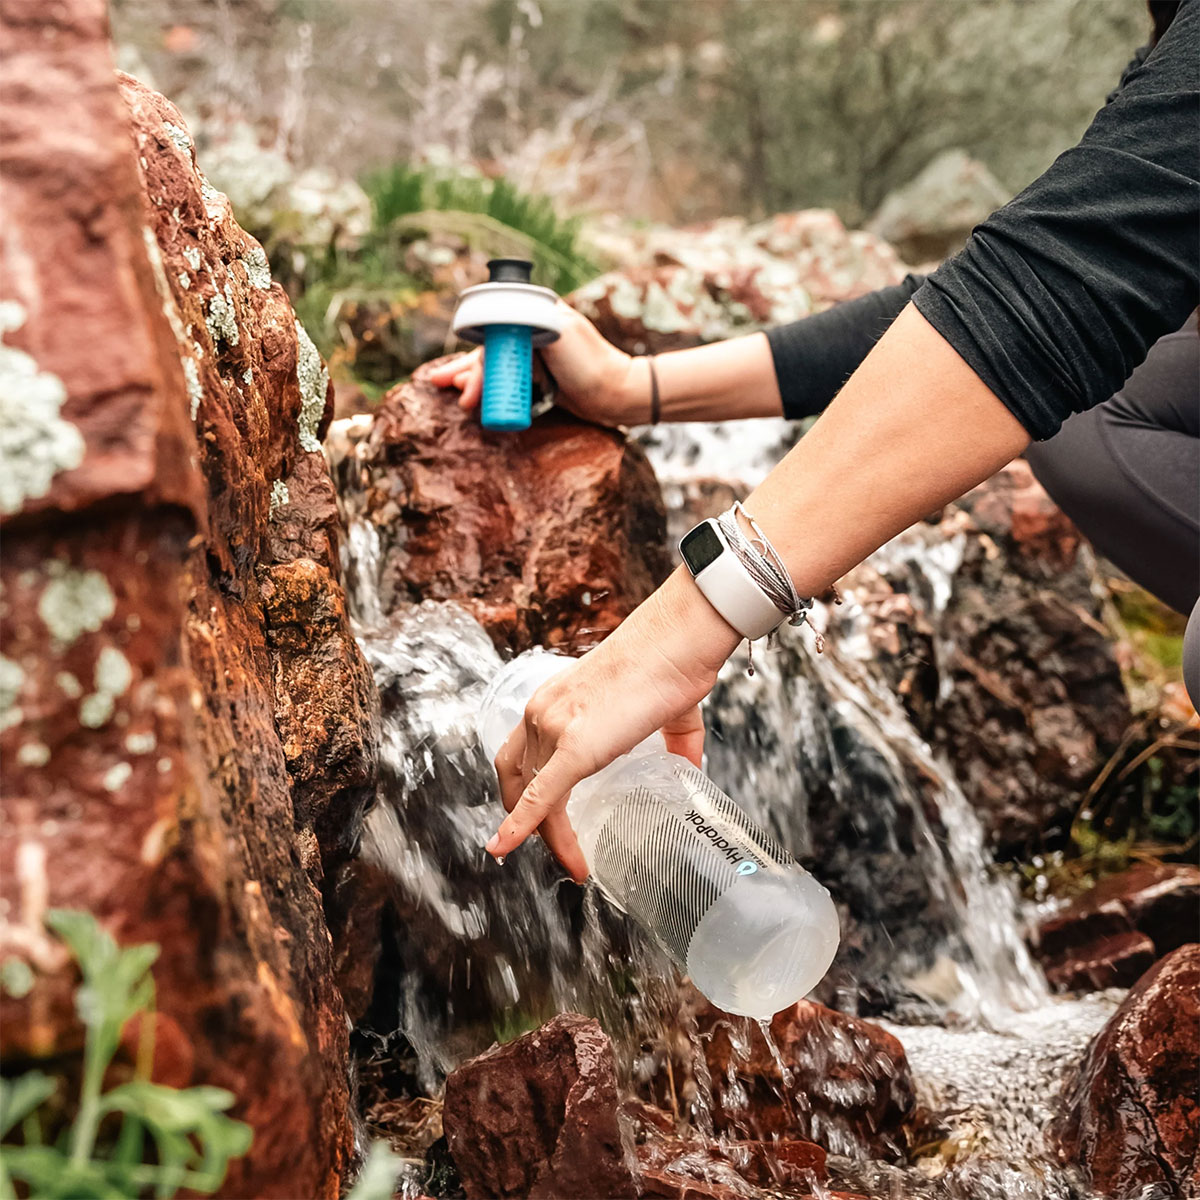 Hydrapak Breakaway+, a Hydration Bottle with Integrated Filter to Purify up to 1,500 Liters of Water